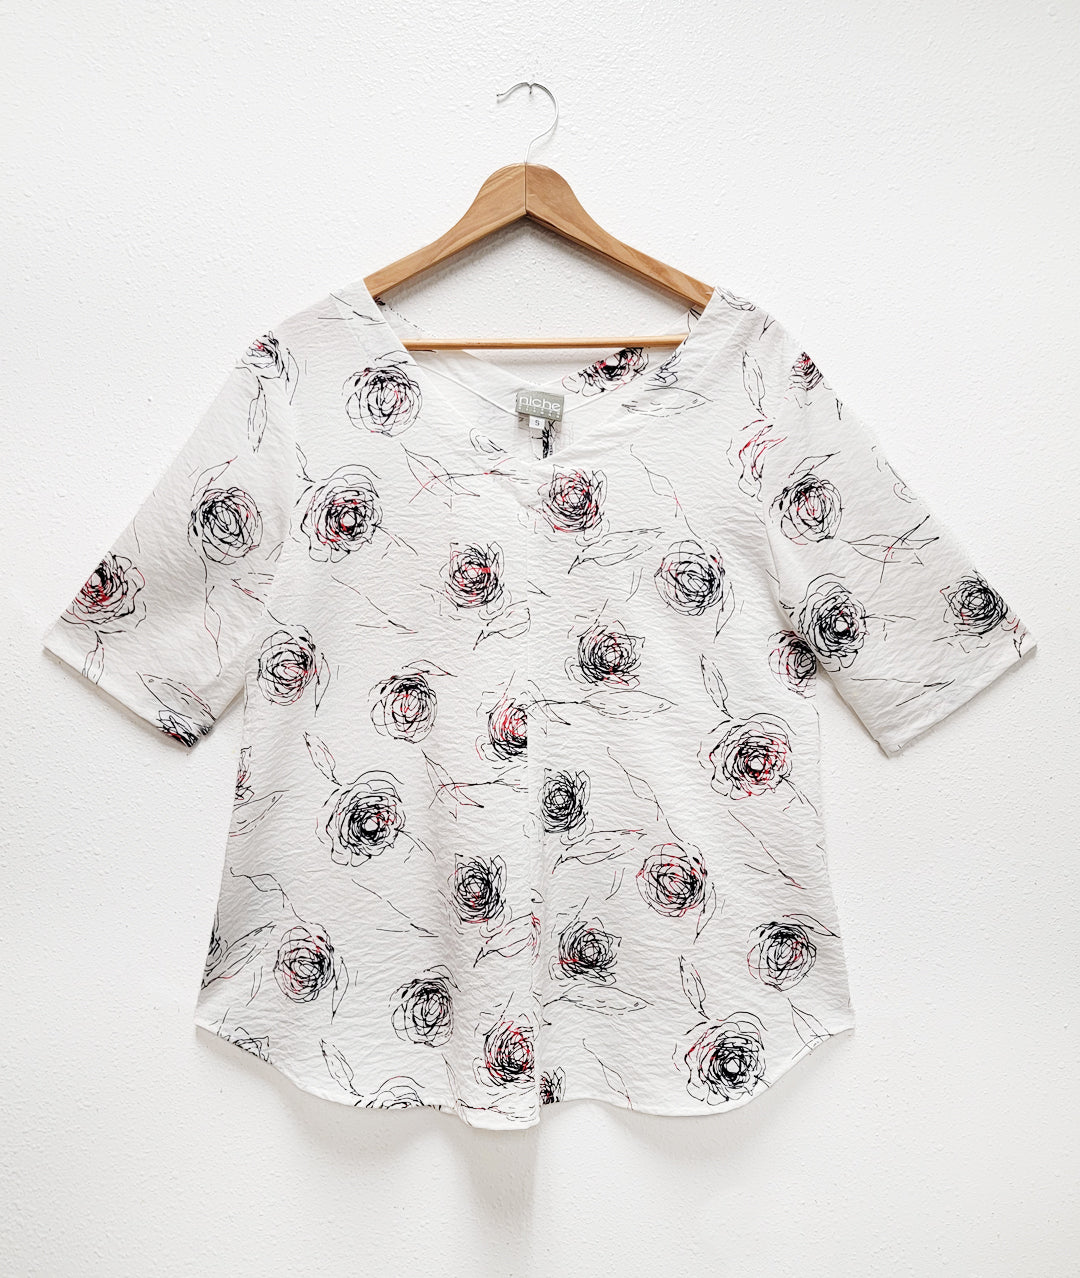 white blouse with a red and black rose print. top has elbow length sleeves and a v shape neckline in the front and back